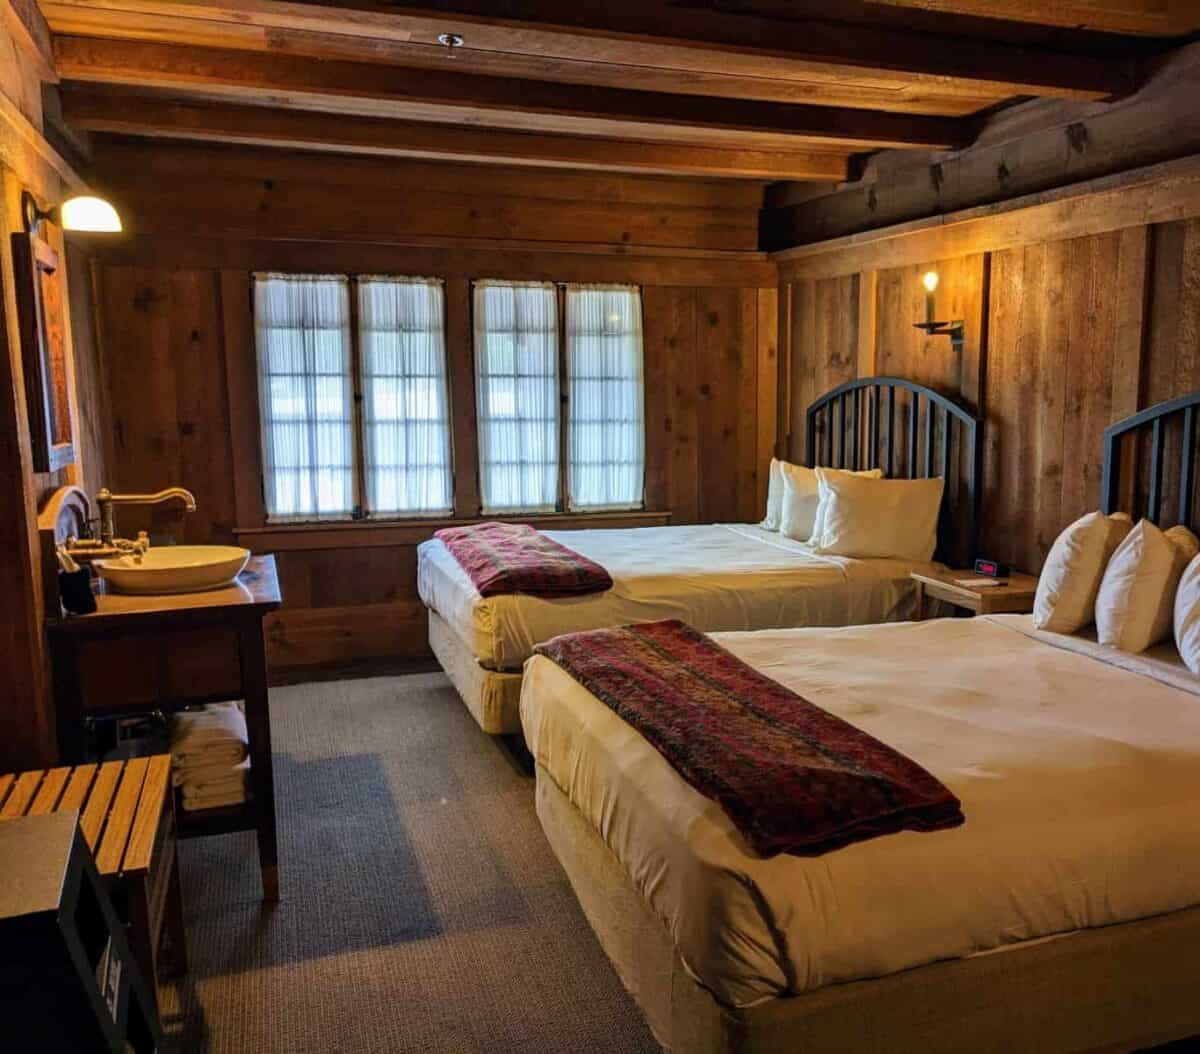 Two beds in an old-fashioned hotel room with wood-paneled walls and ceiling.